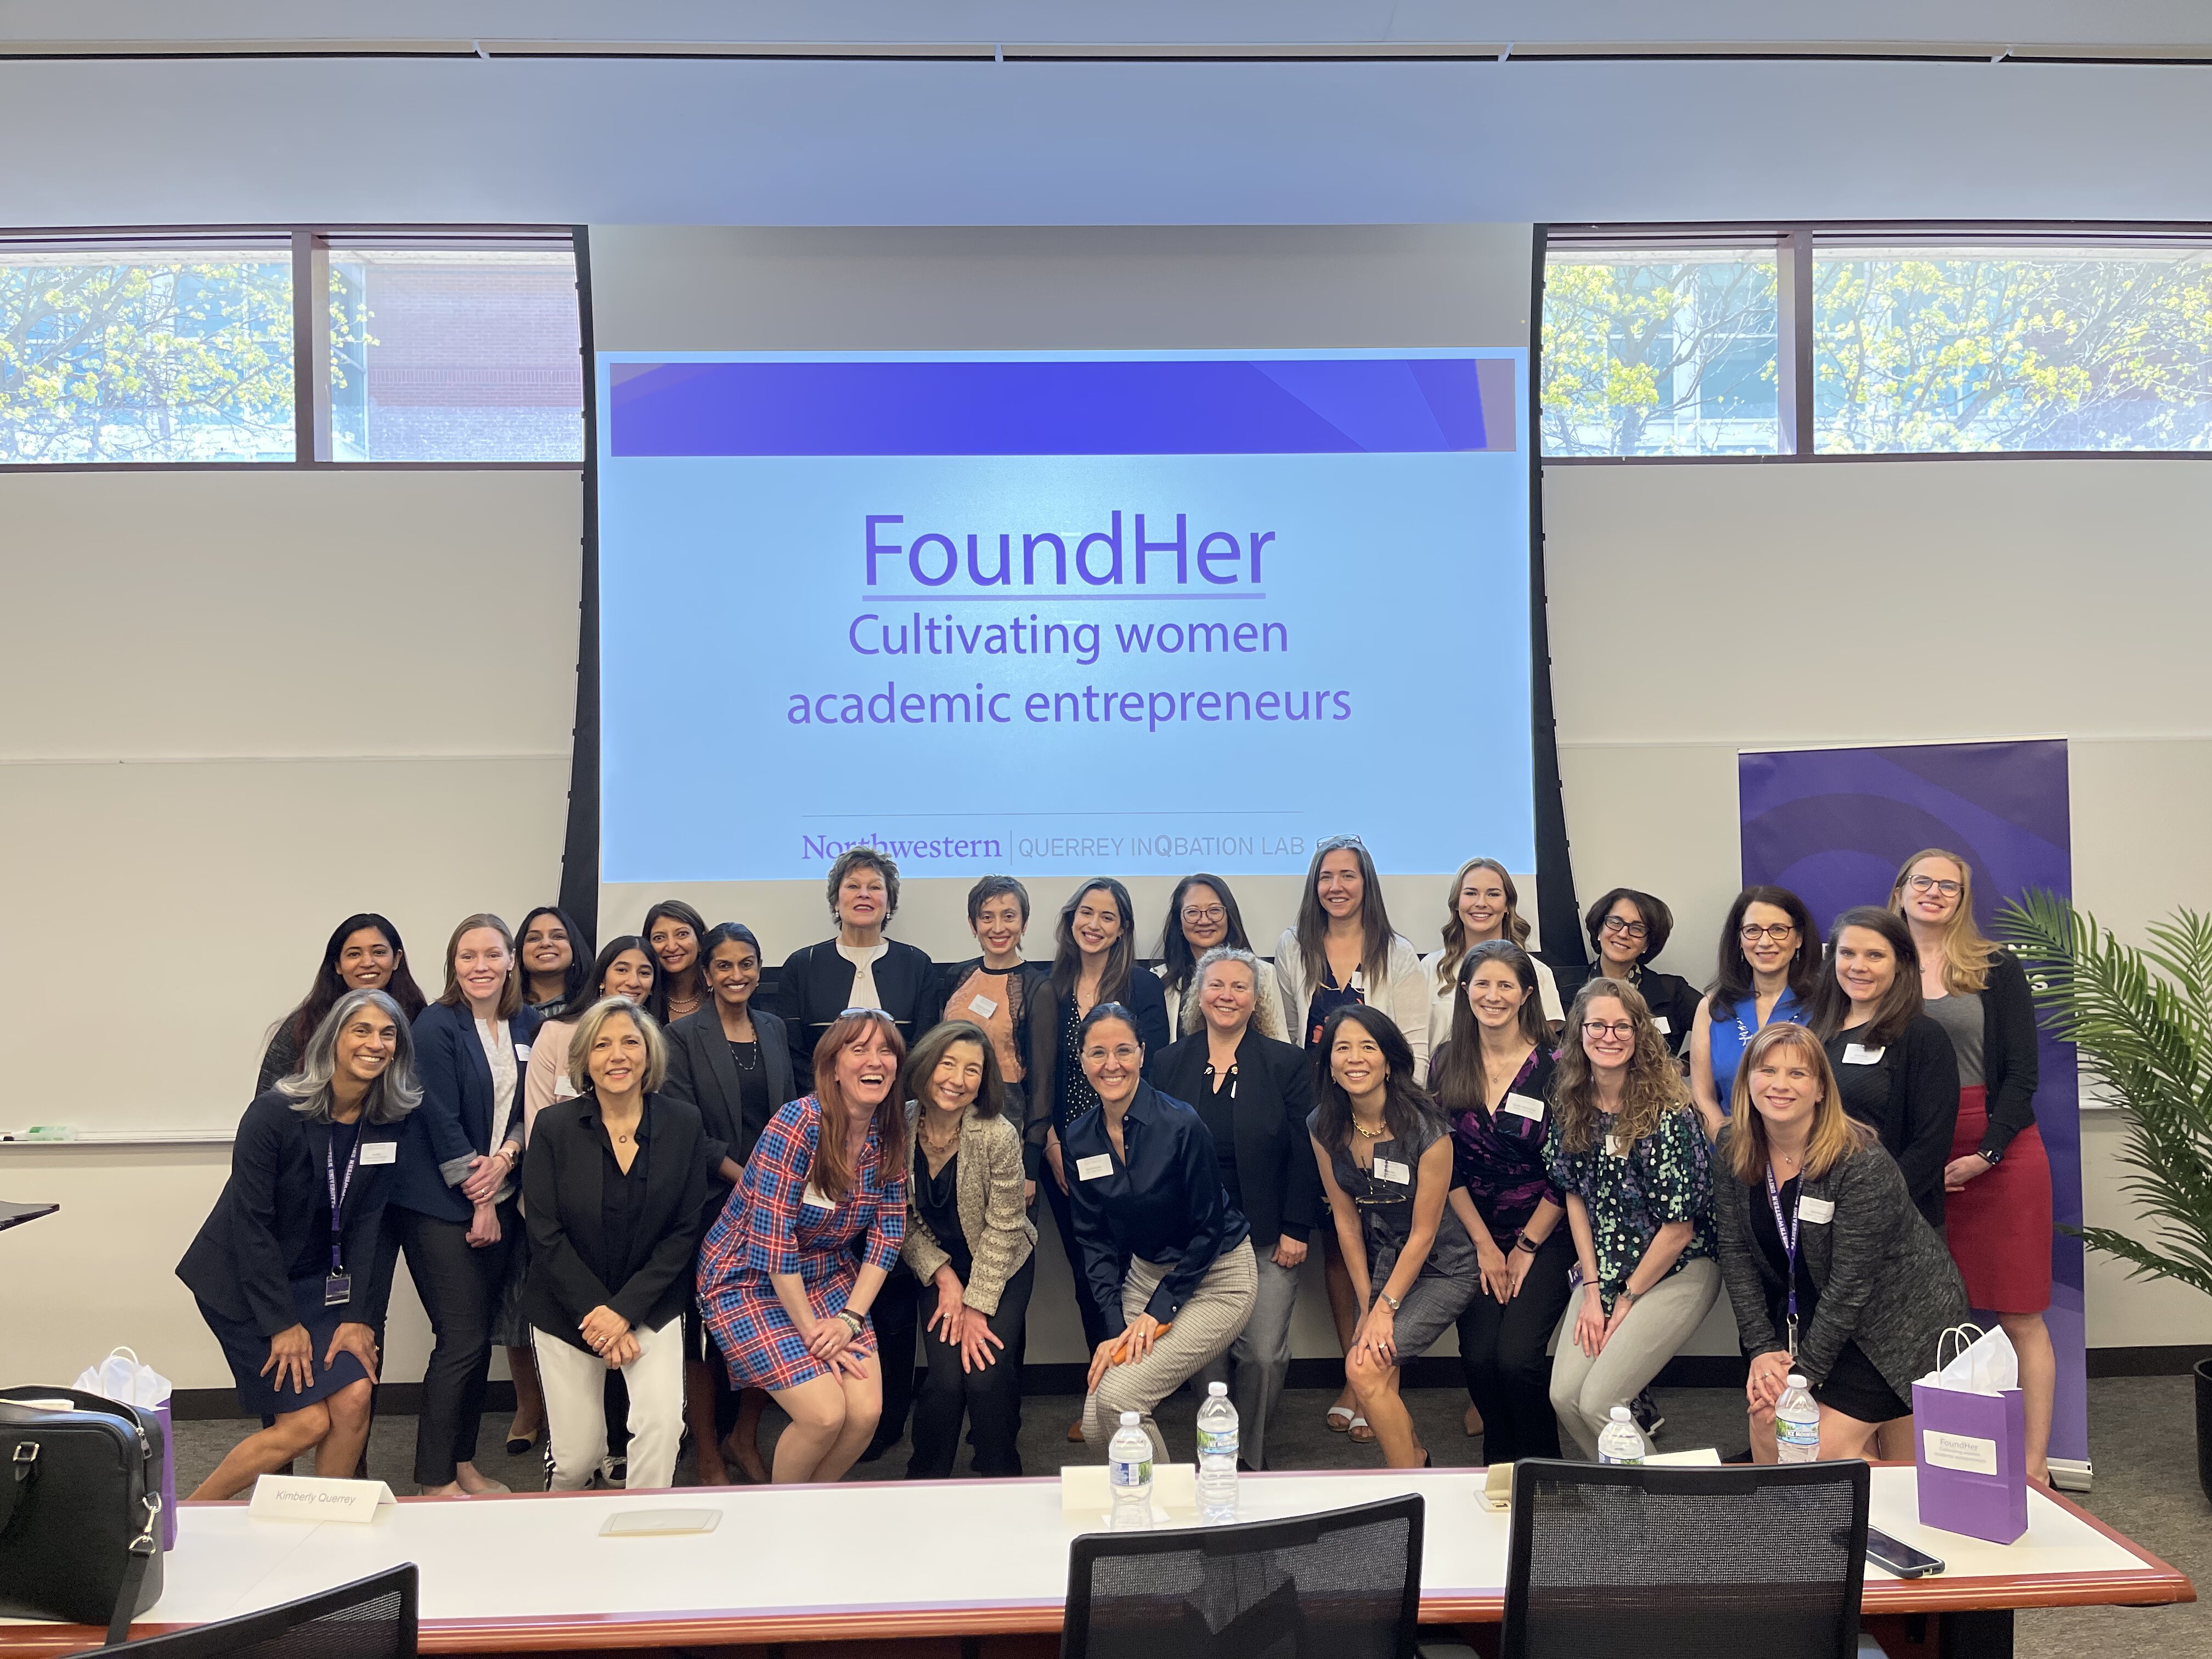 A group of women stand together in front of a screen reading: "FoundHer: Cultivating women academic entrepreneurs."